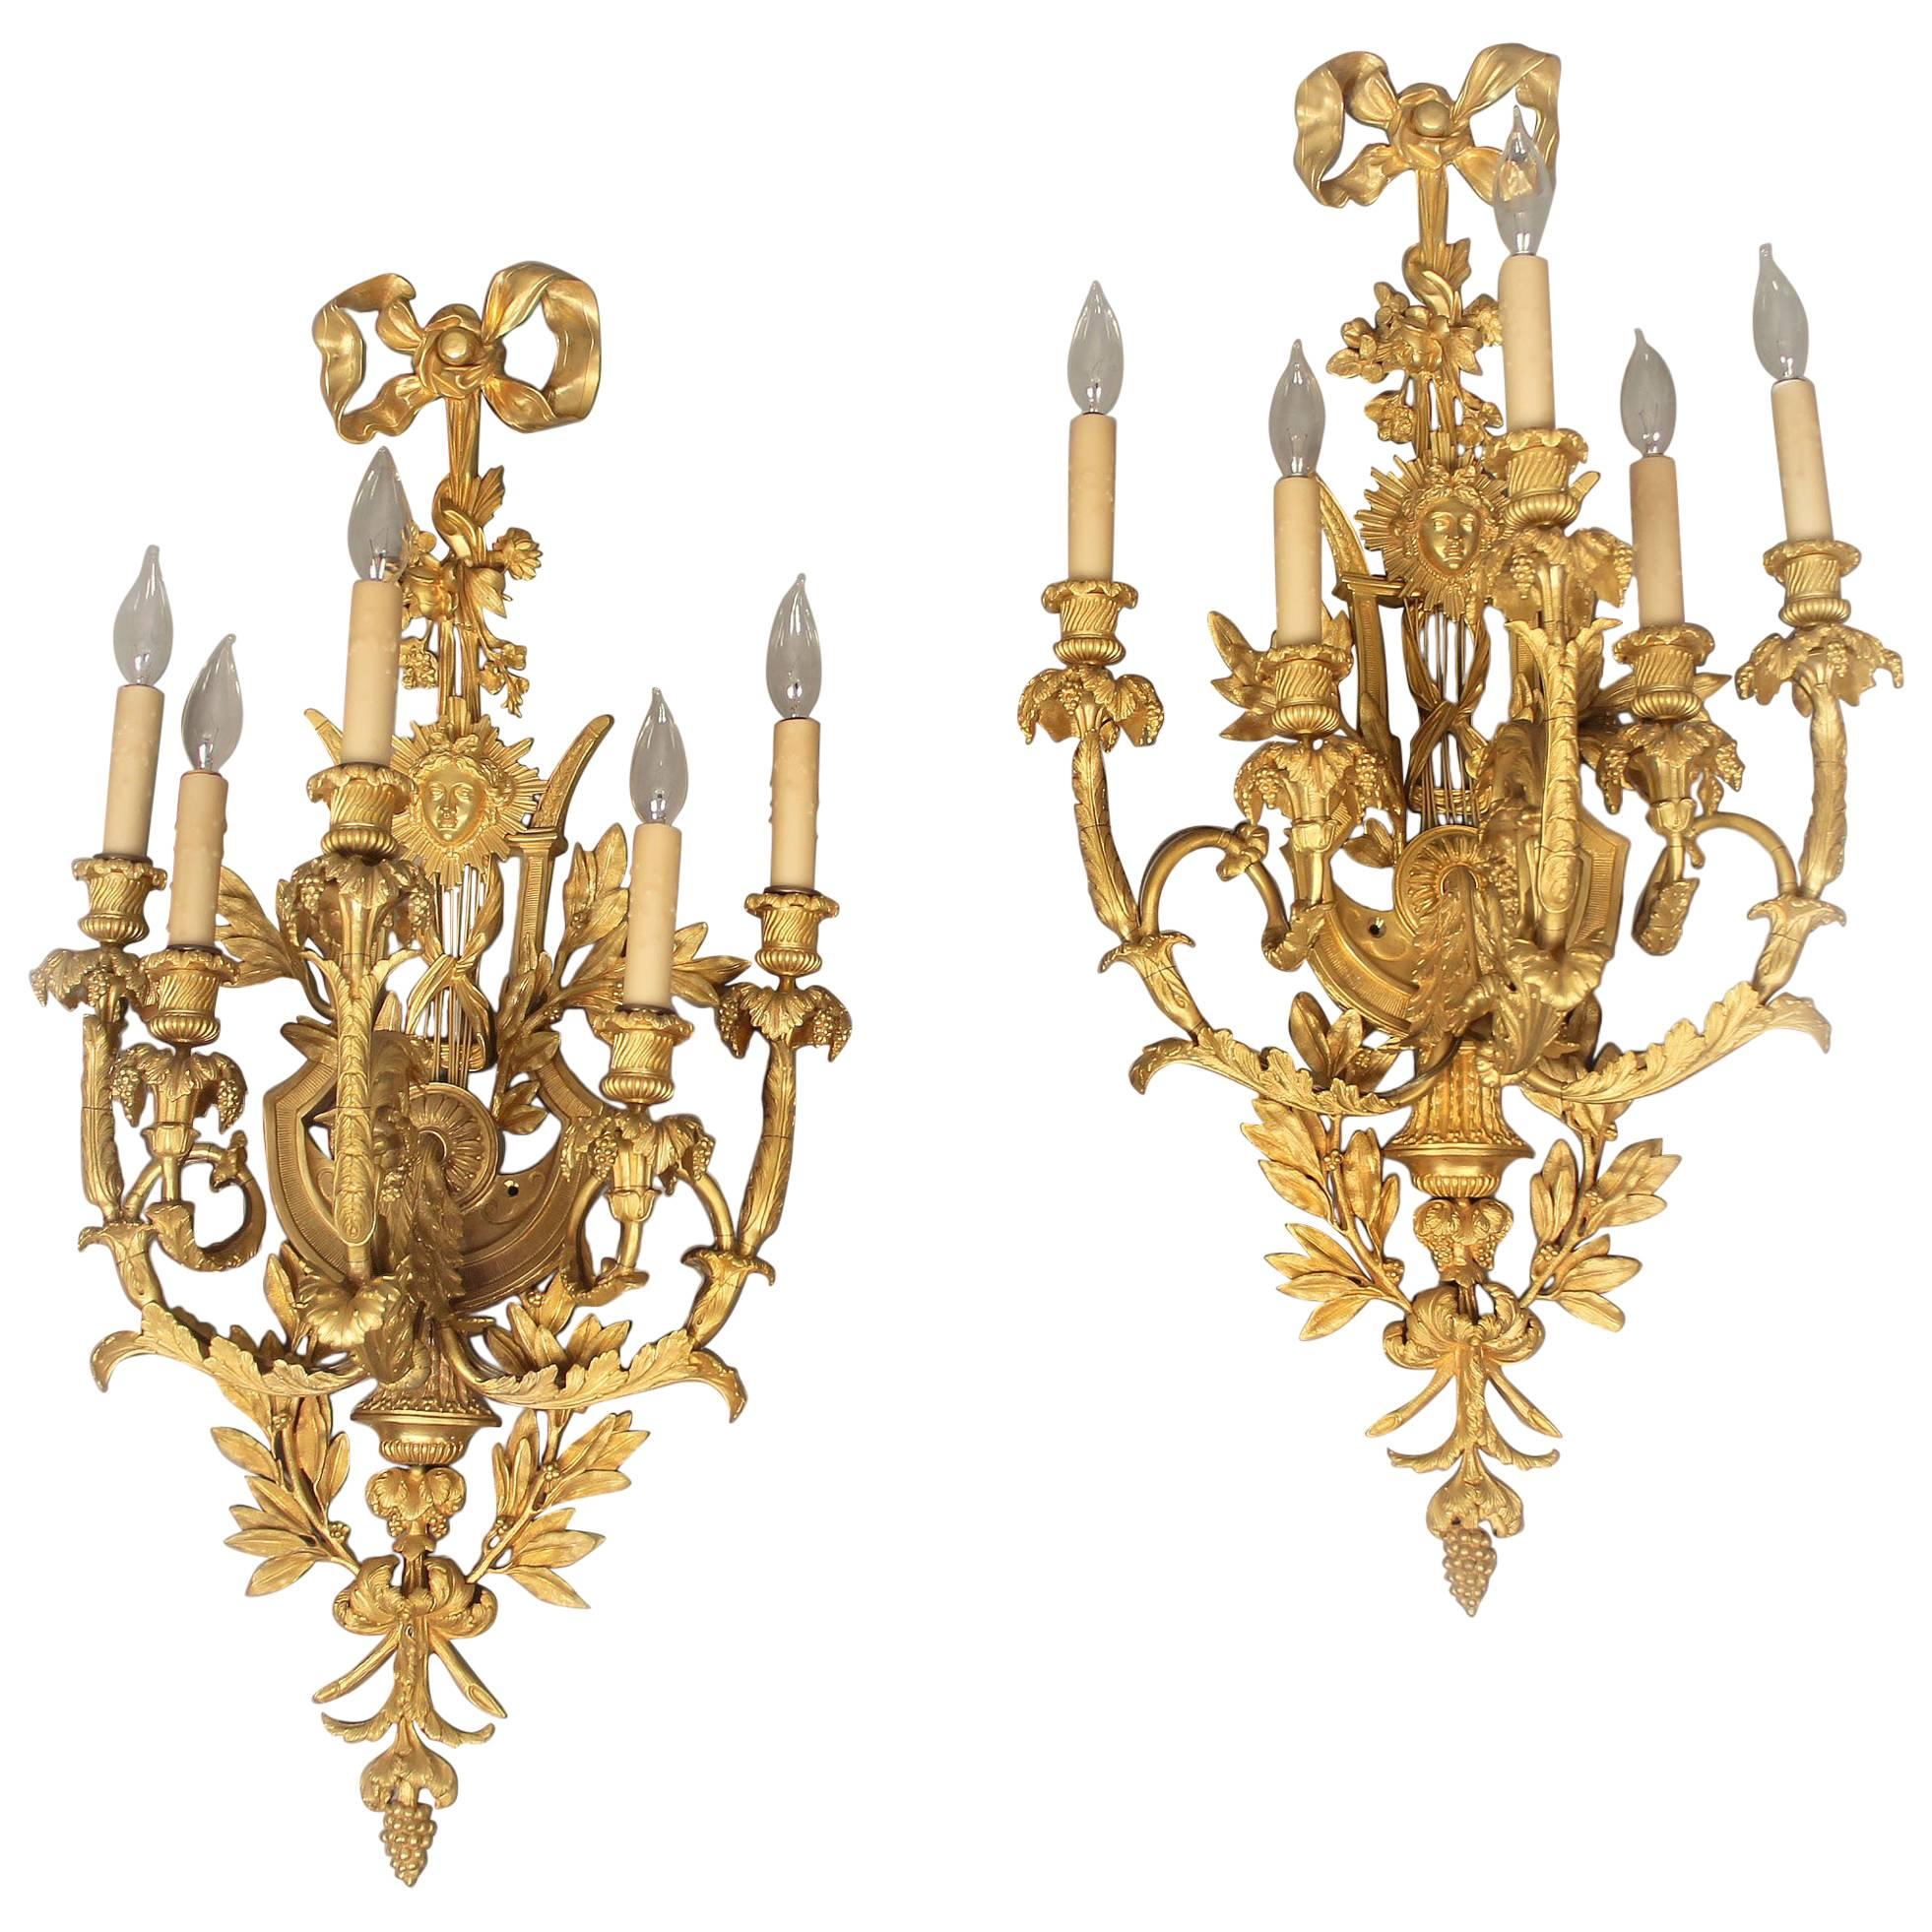 Large and Elaborate Pair of Early 20th Century Gilt Bronze Five-Light Sconces For Sale